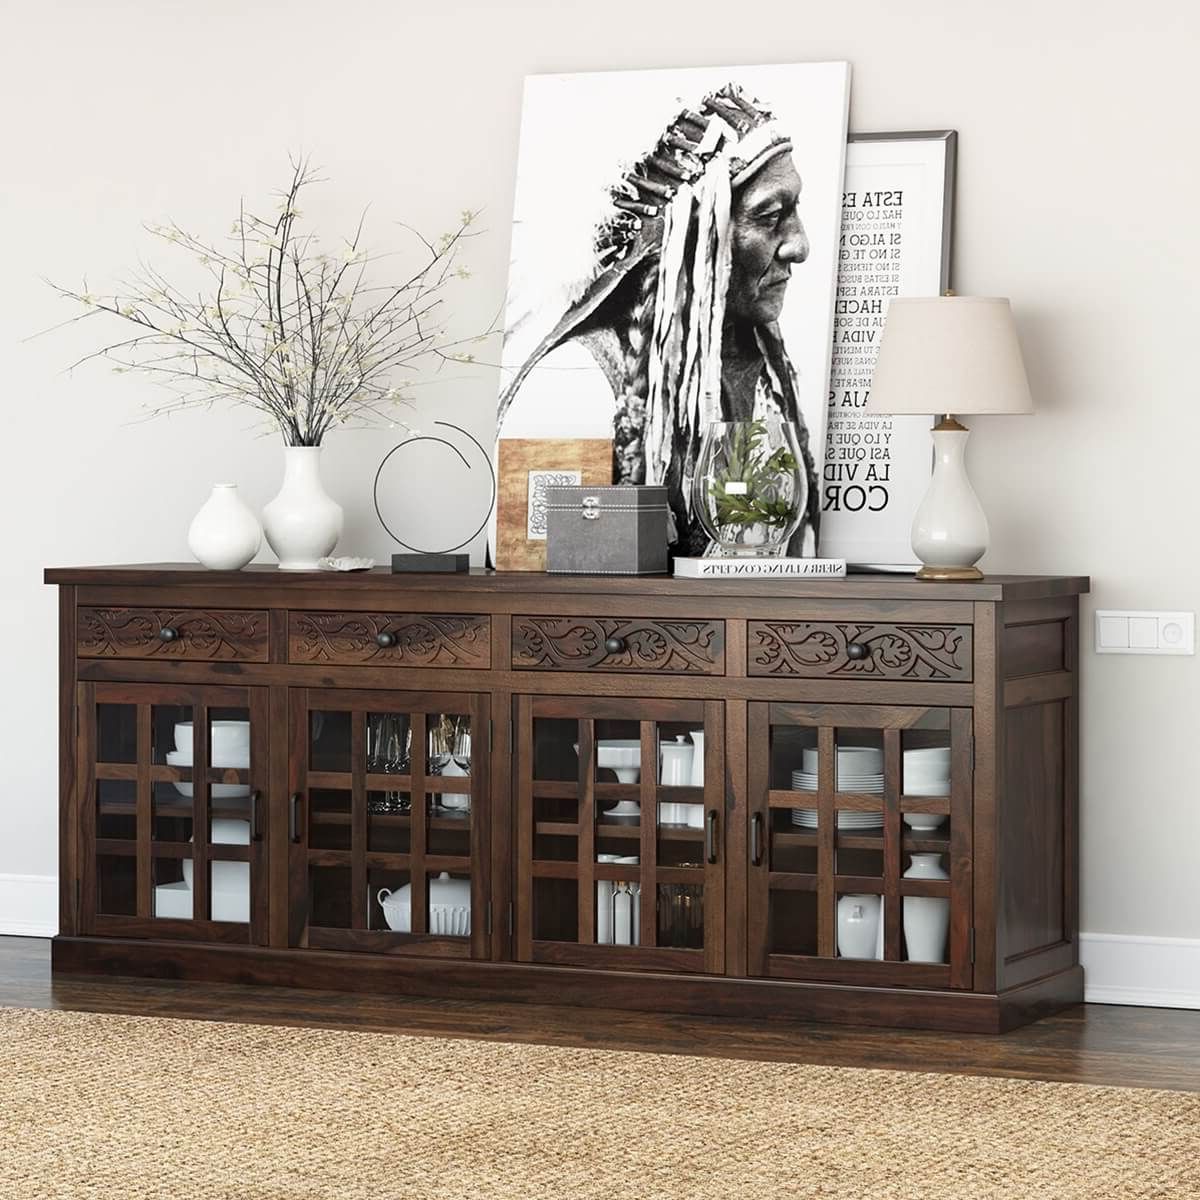 Most Popular Dallas Ranch Rustic Solid Wood 4 Drawer Extra Long Buffet Cabinet With Regard To Sideboard Buffet Cabinets (View 6 of 15)